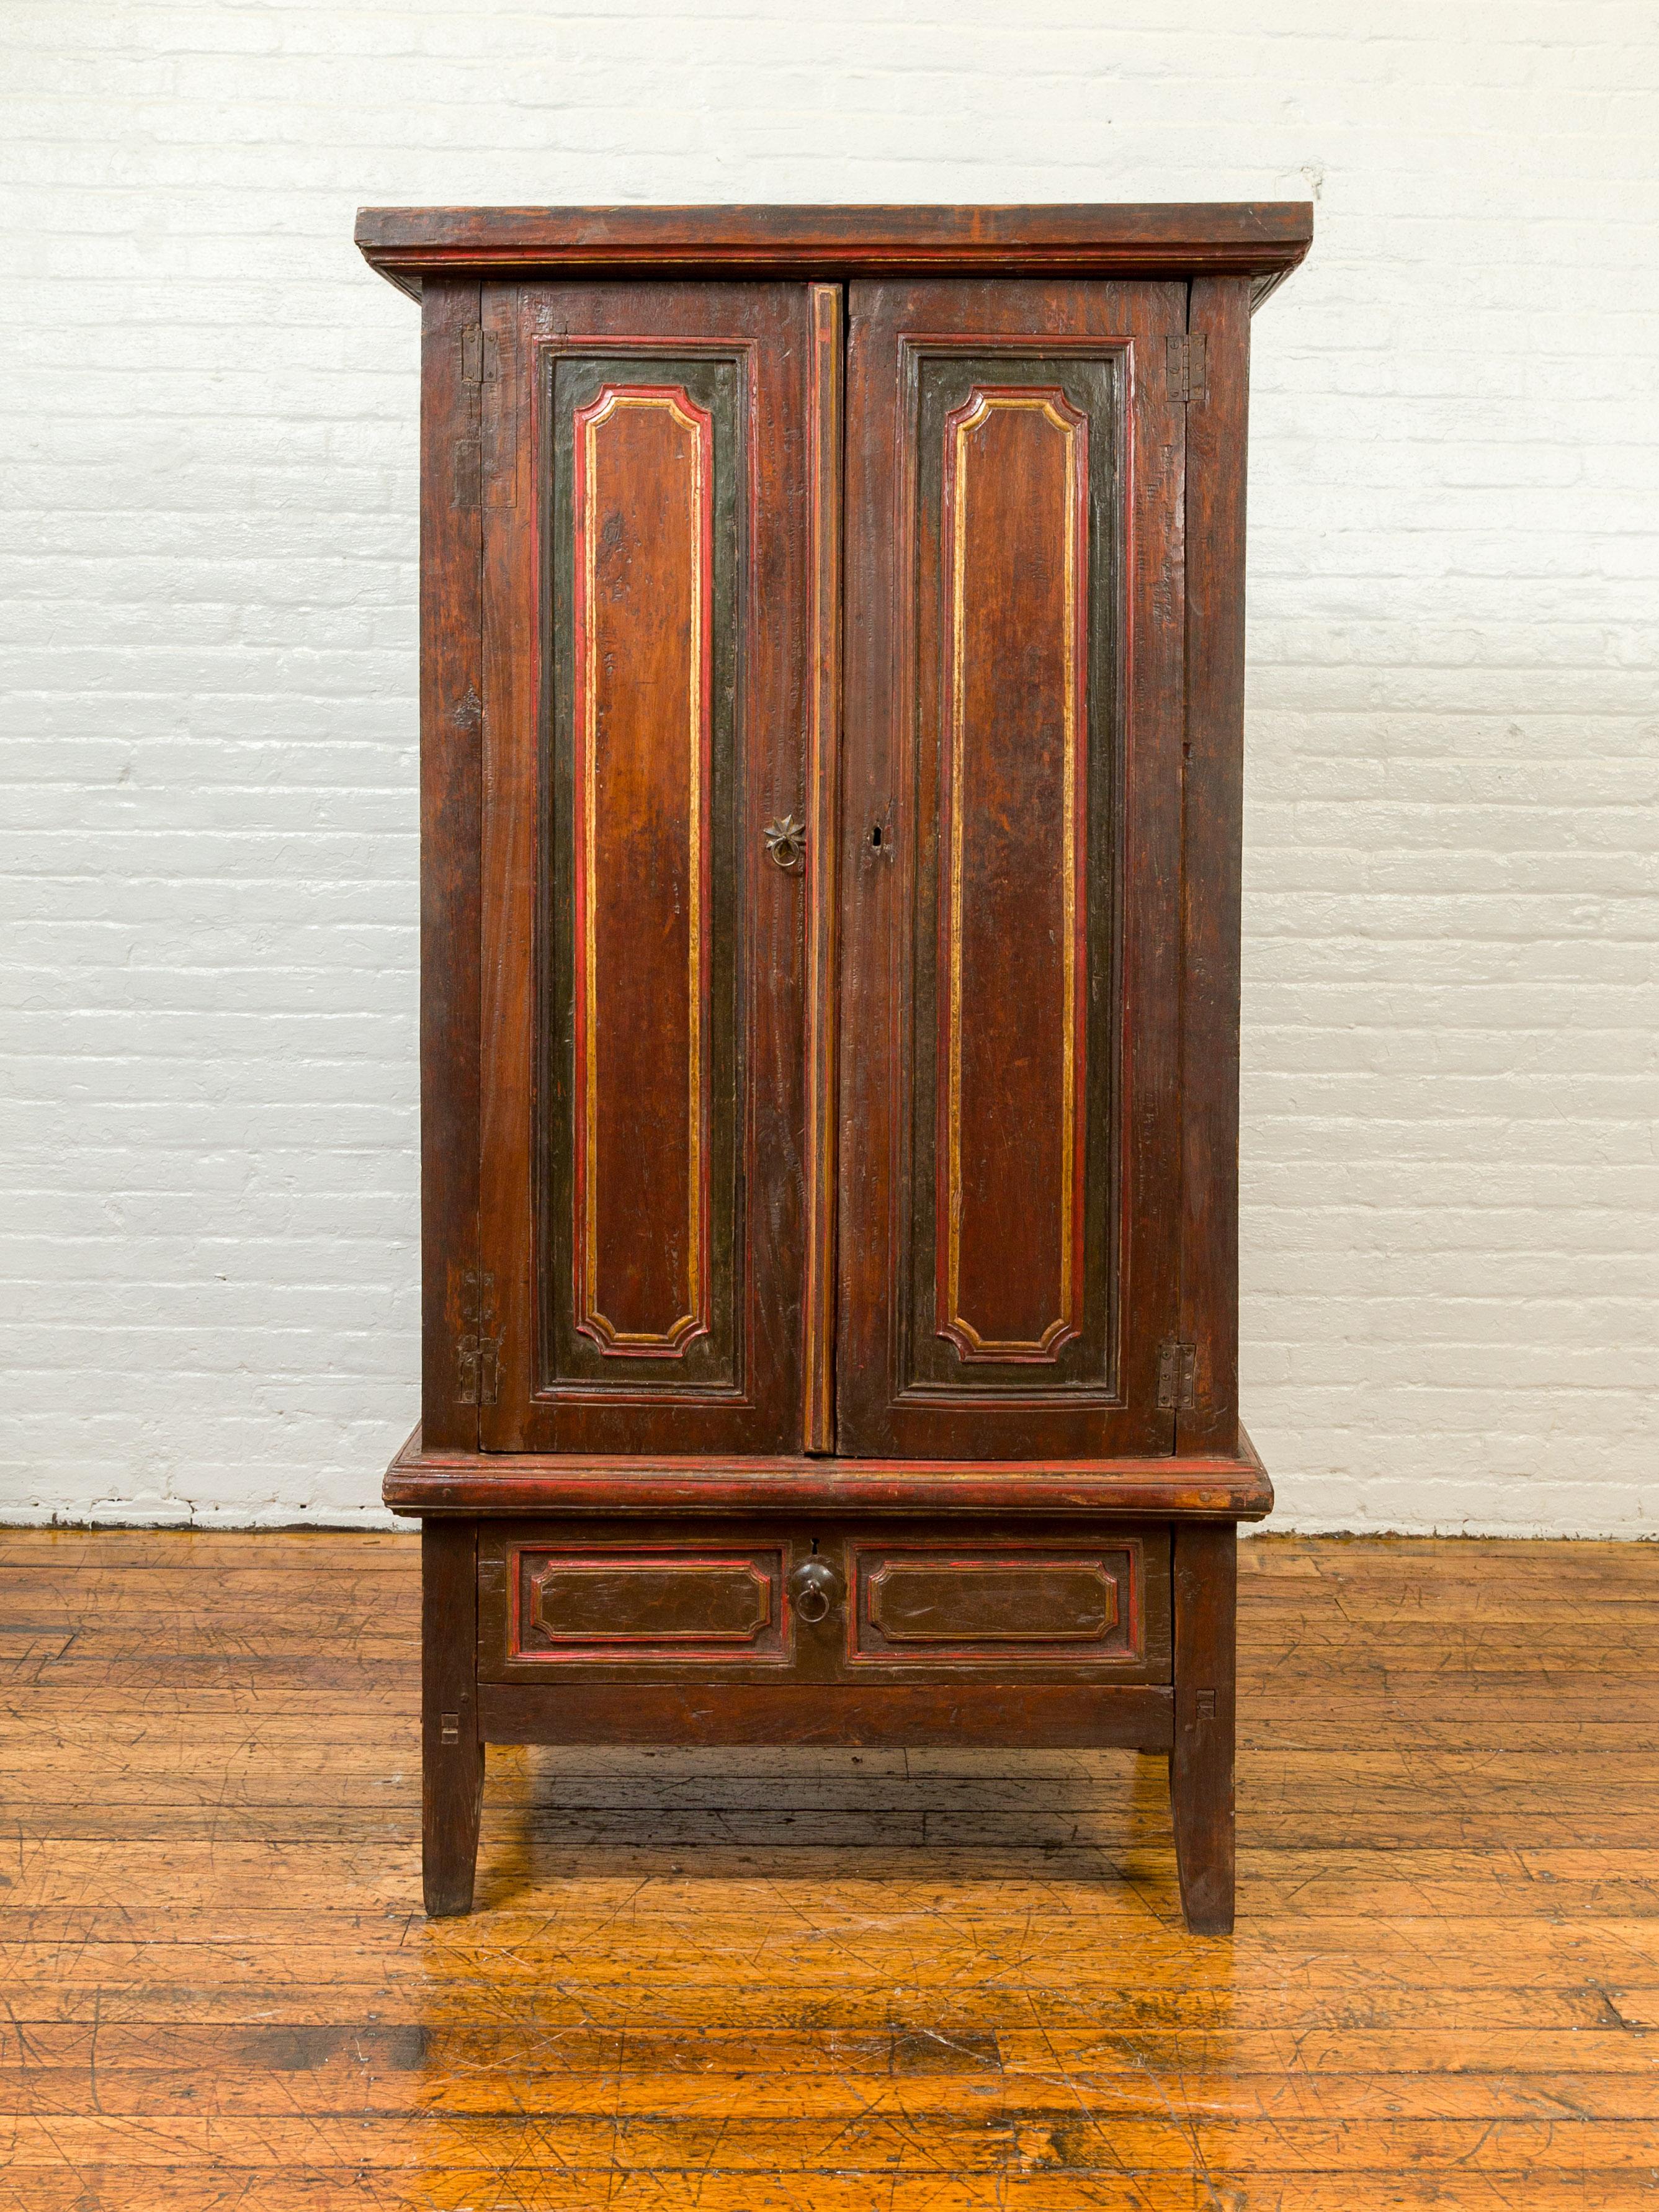 Indonesian Dutch Colonial 19th Century Cabinet with Polychrome Finish and Carved Sides